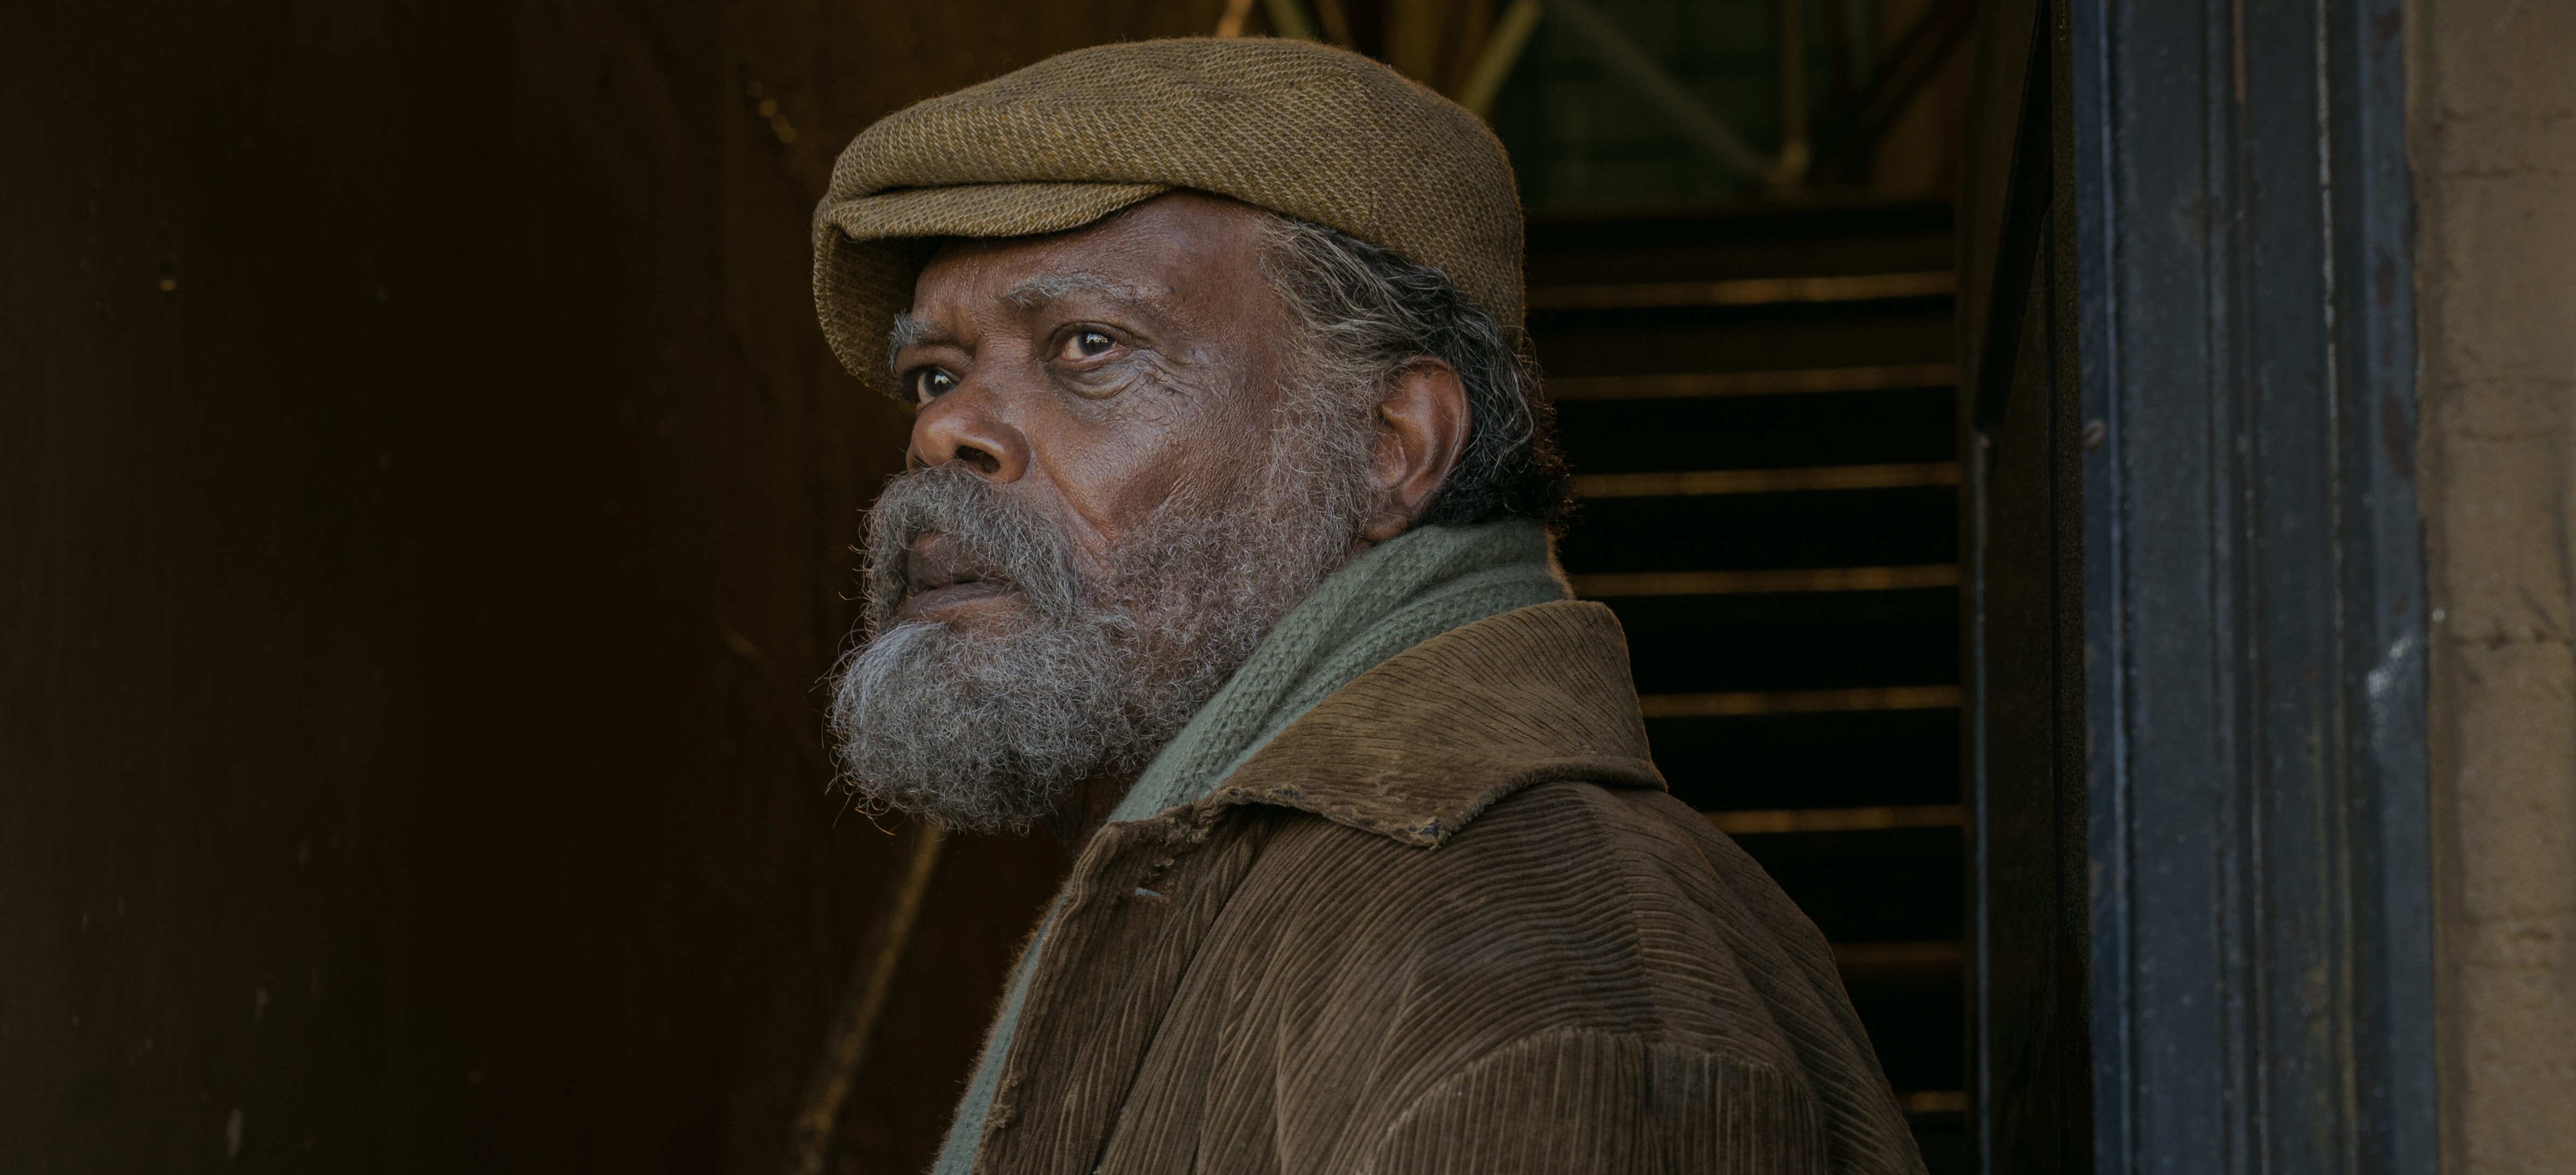 Samuel L. Jackson and Boyd Holbrook’s ‘Last Meals’ Scheduled to Film in Georgia Later This Year